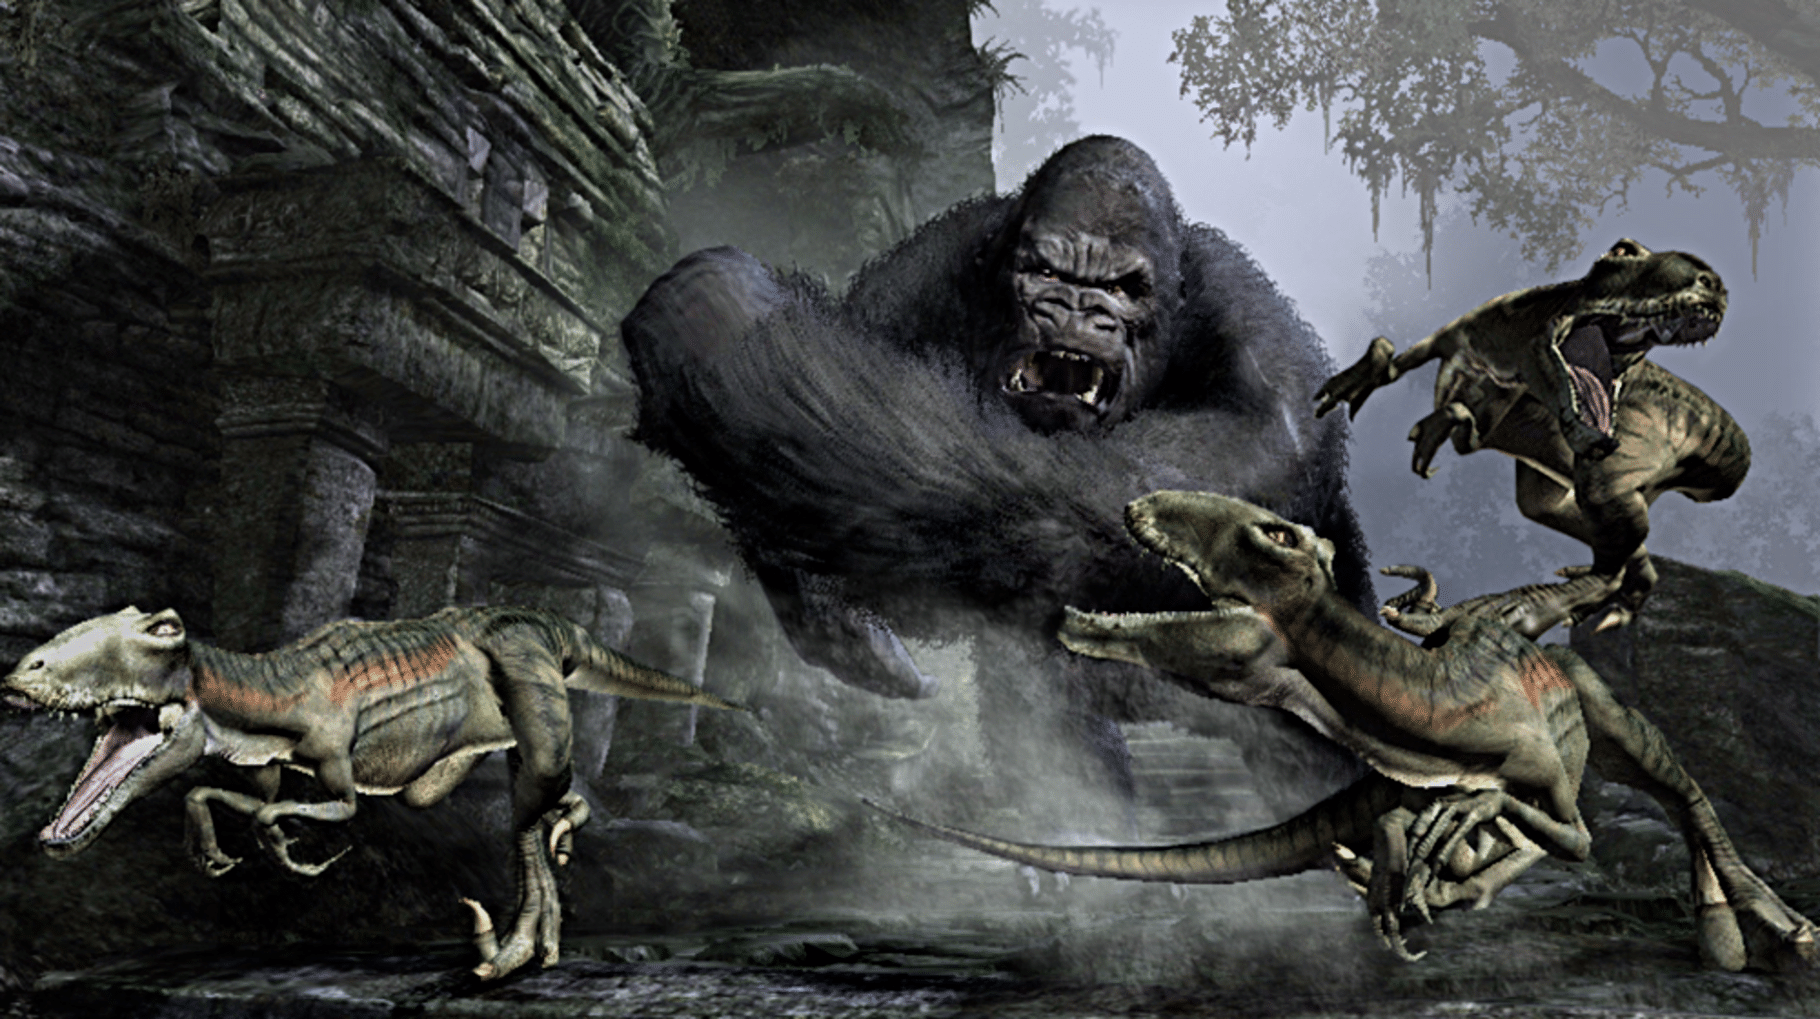 Peter Jackson's King Kong: The Official Game of the Movie screenshot